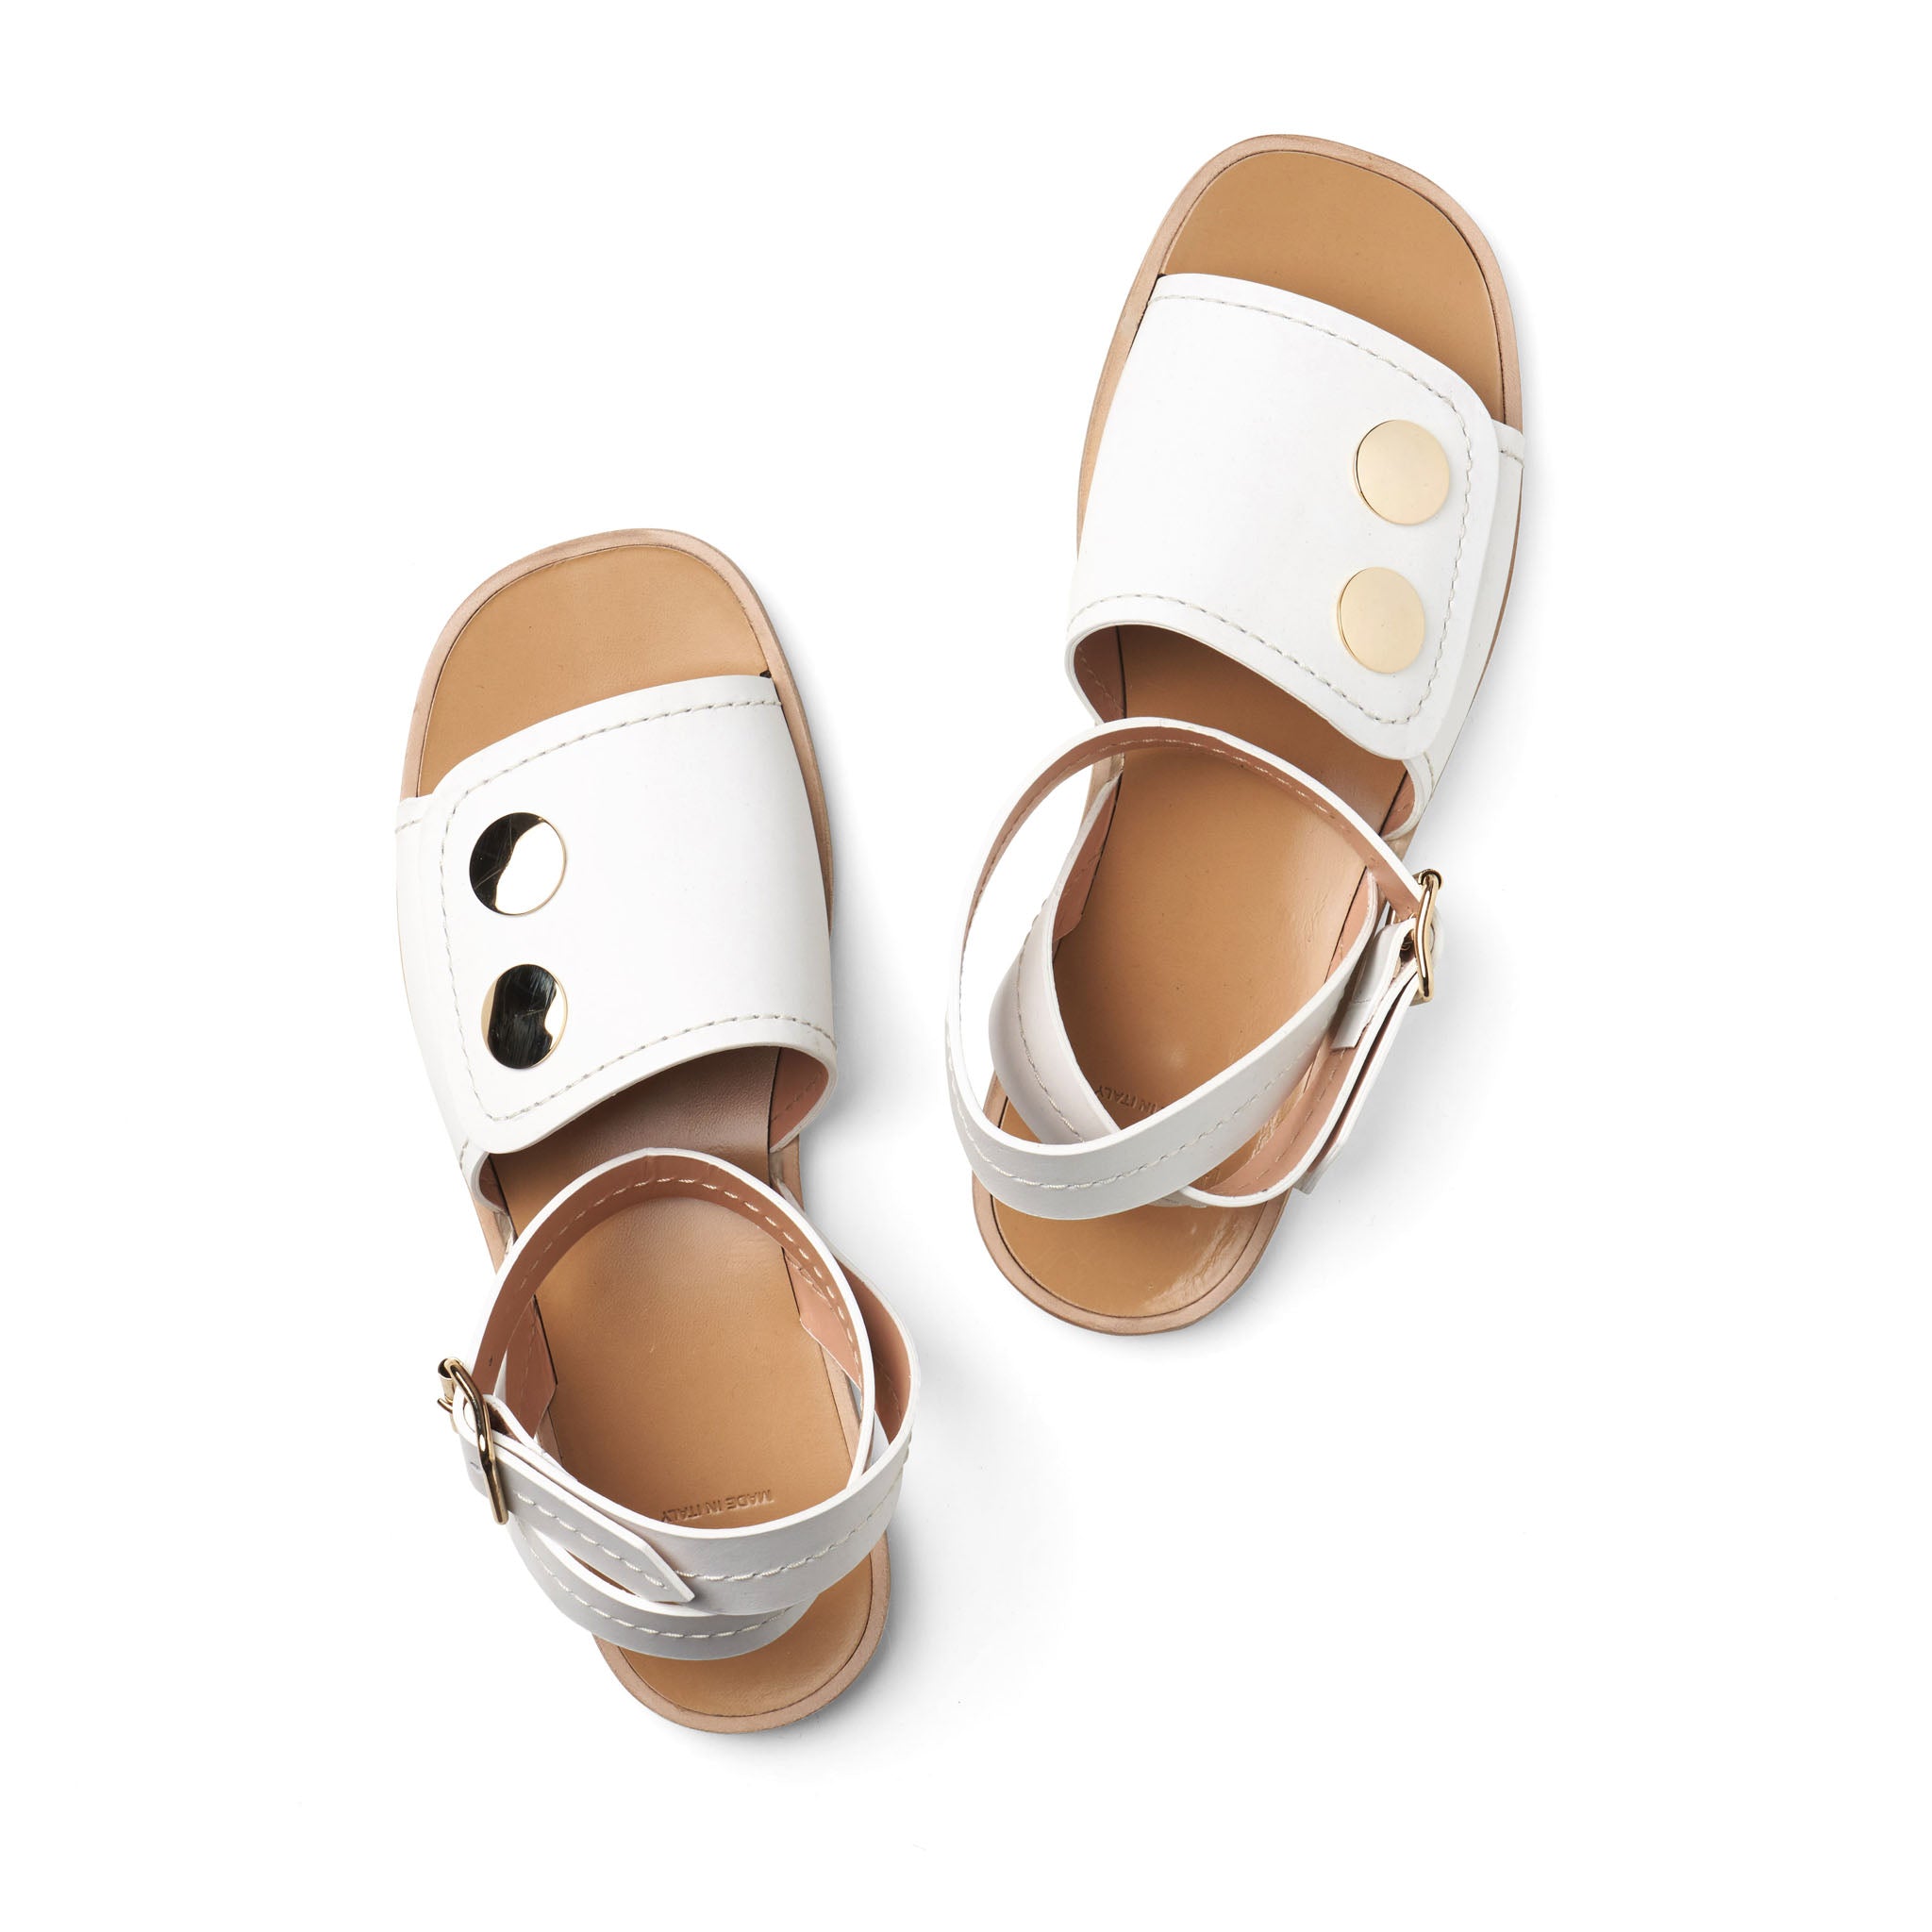 pair of white sandals for women shown has softly squared off toe shape, open toe with crossover strap at ankle, oversized gold metal studs and buckle detail 